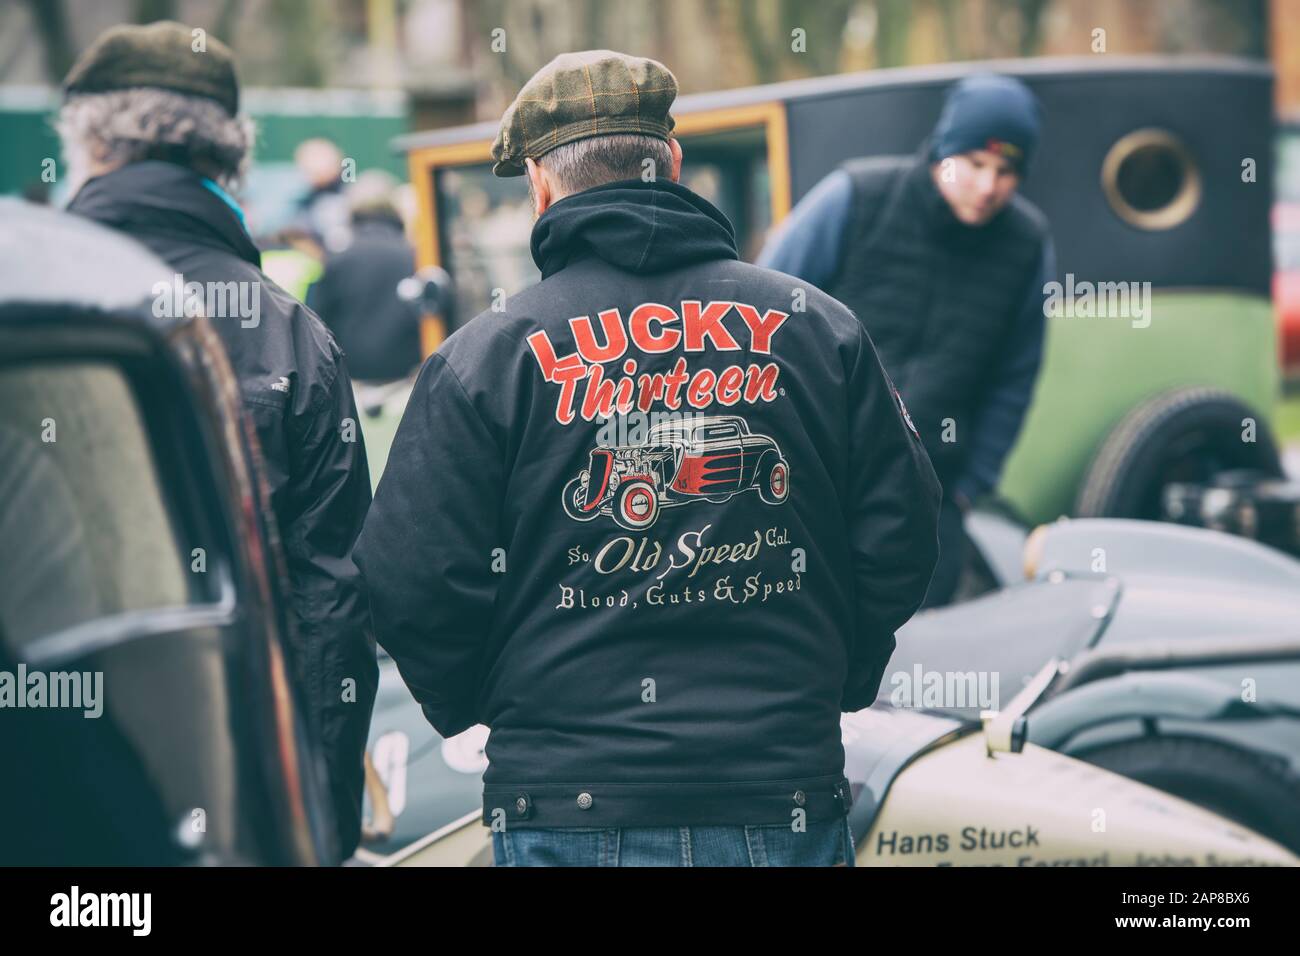 Car enthusiast wearing a Lucky thirteen old speed jacket at Bicester heritage centre sunday scramble event. Bicester, Oxfordshire, England. Stock Photo